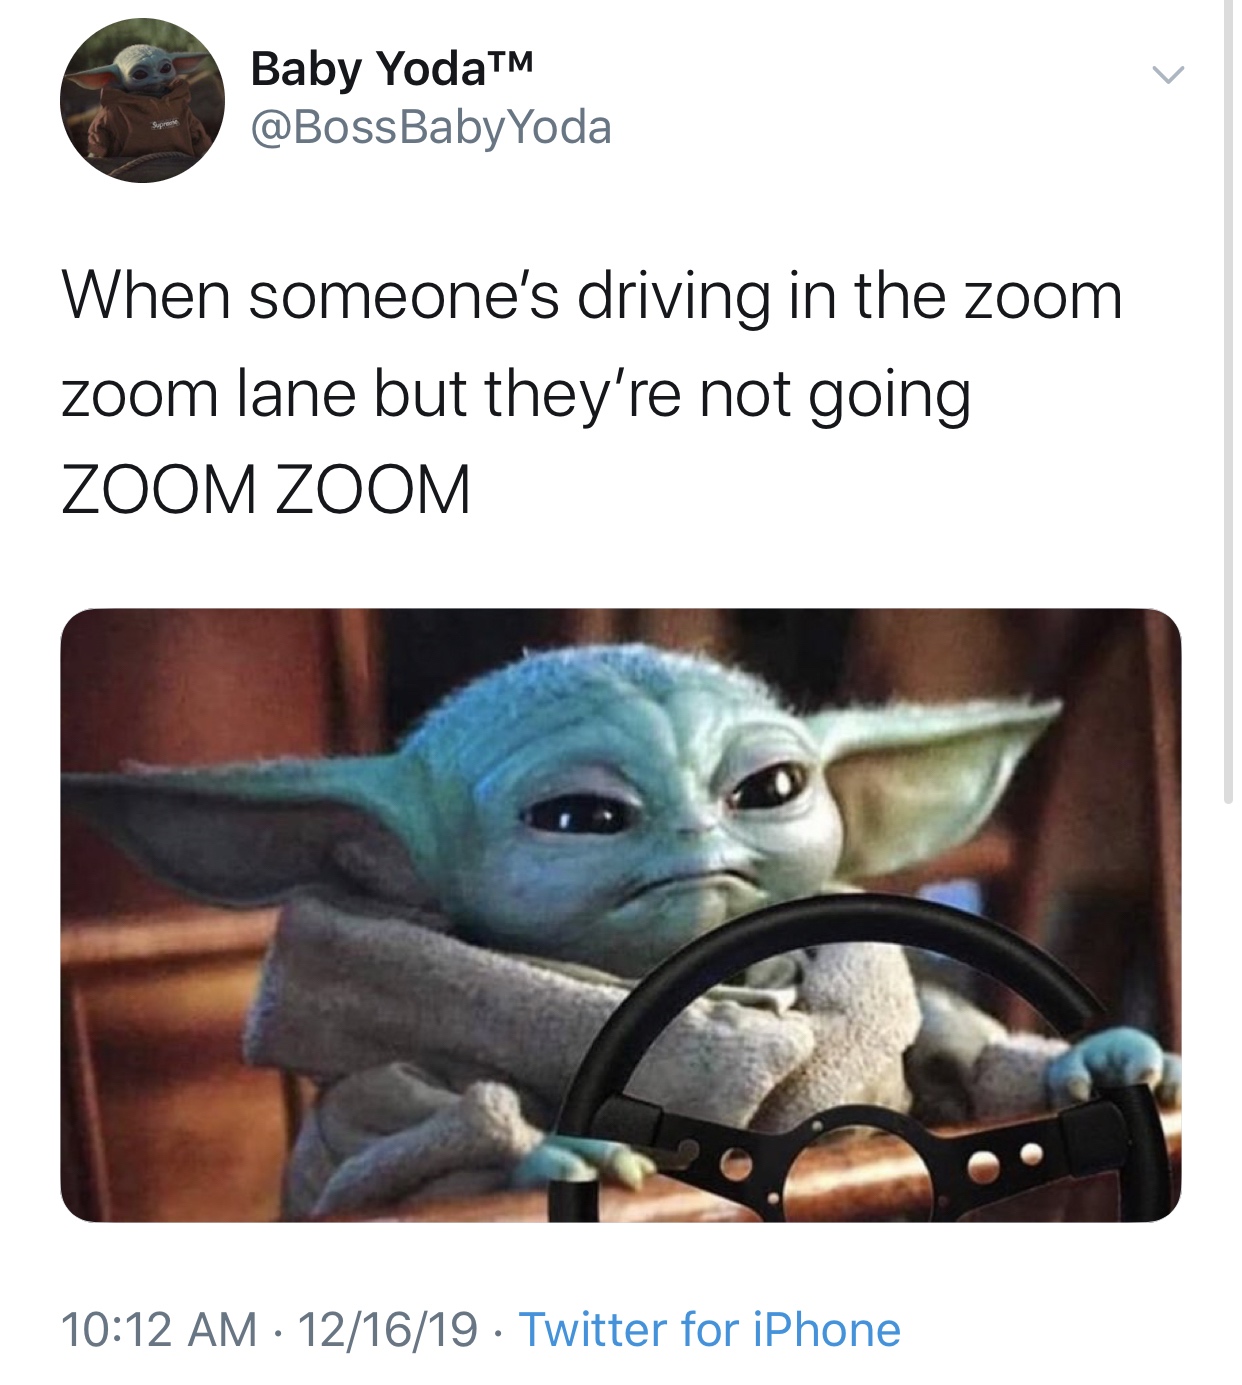 Yoda - Baby YodaTM When someone's driving in the zoom zoom lane but they're not going Zoom Zoom 121619 Twitter for iPhone